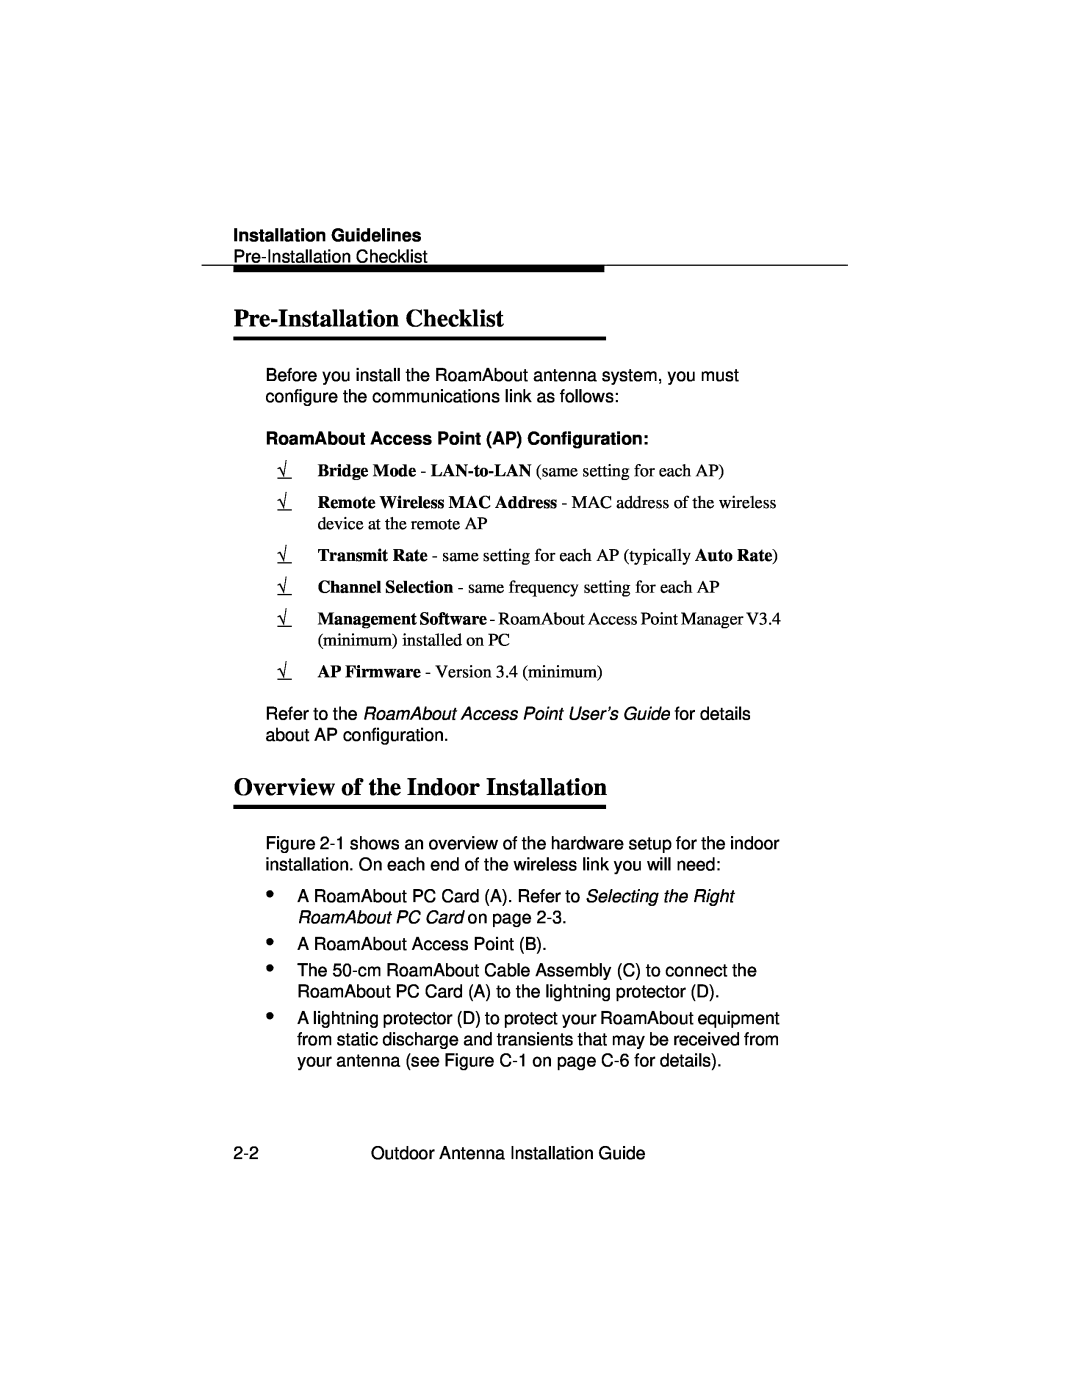 Cabletron Systems 9033073 manual Pre-InstallationChecklist, Overview of the Indoor Installation, Installation Guidelines 